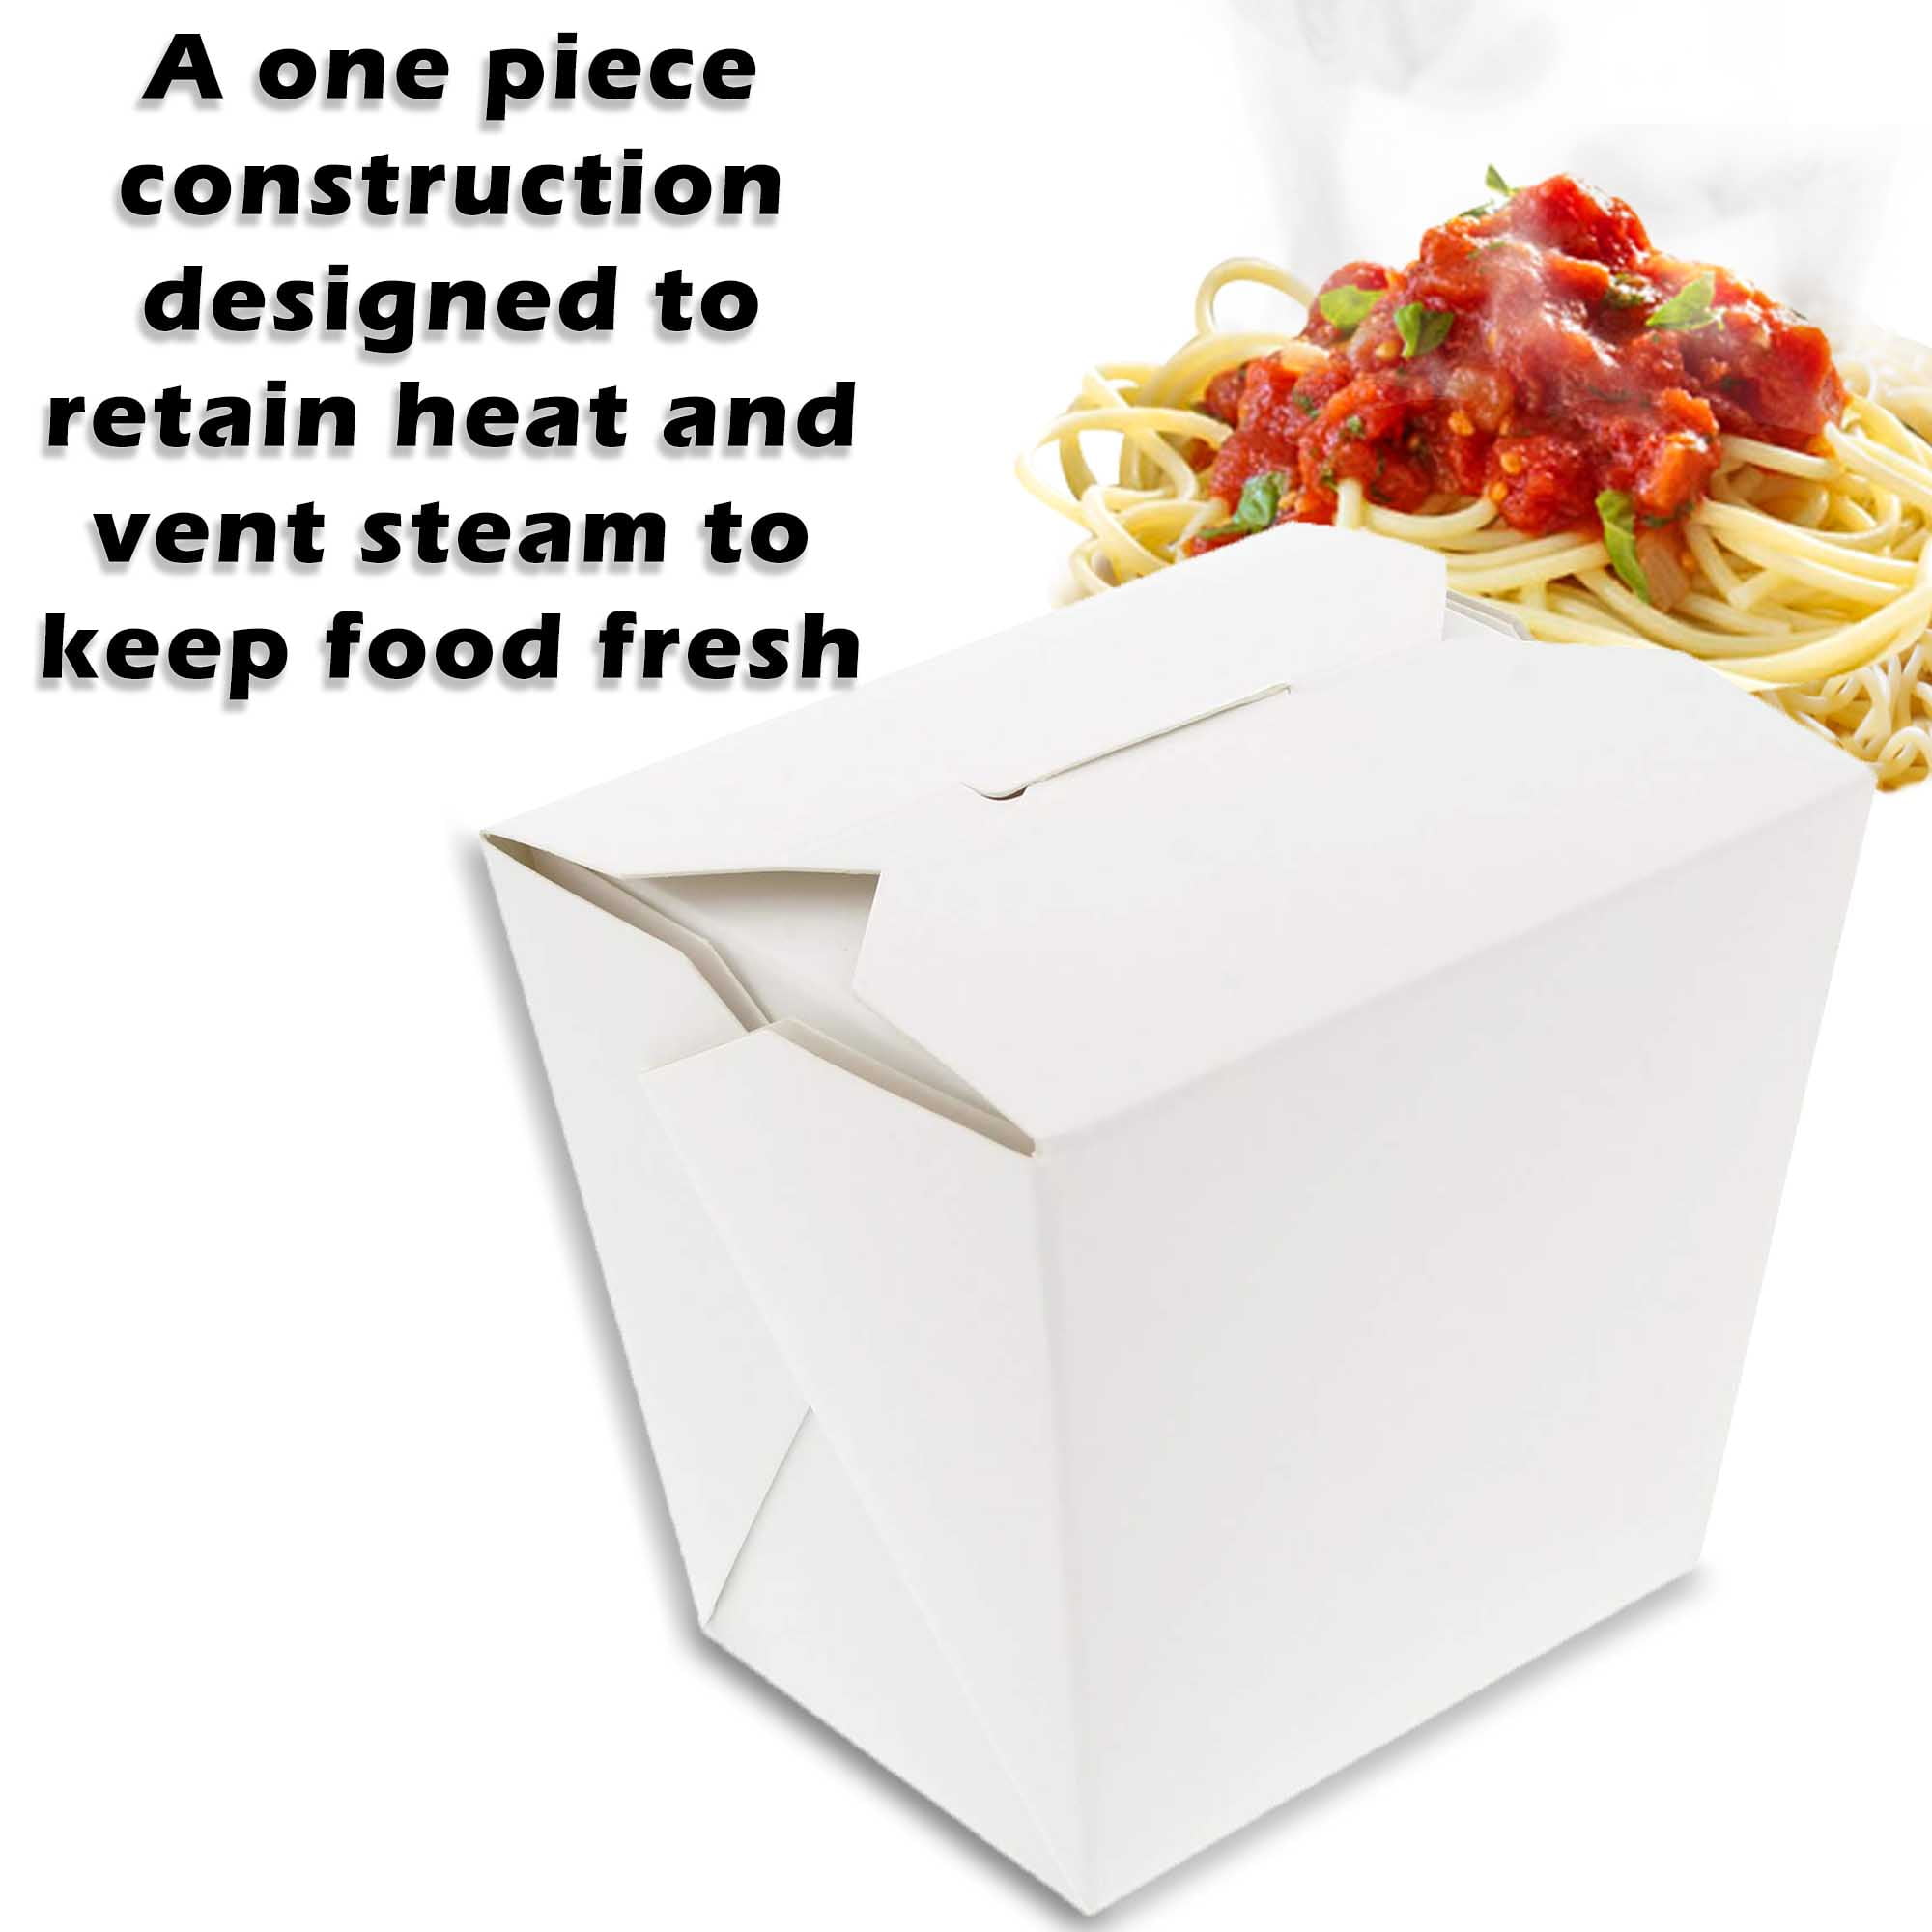 [450 Pack] Chinese Take Out Boxes - 26 oz Plain White Chinese Food  Containers for To Go Asian Meals - Chinese Food Boxes for Noodles, Rice -  Takeout